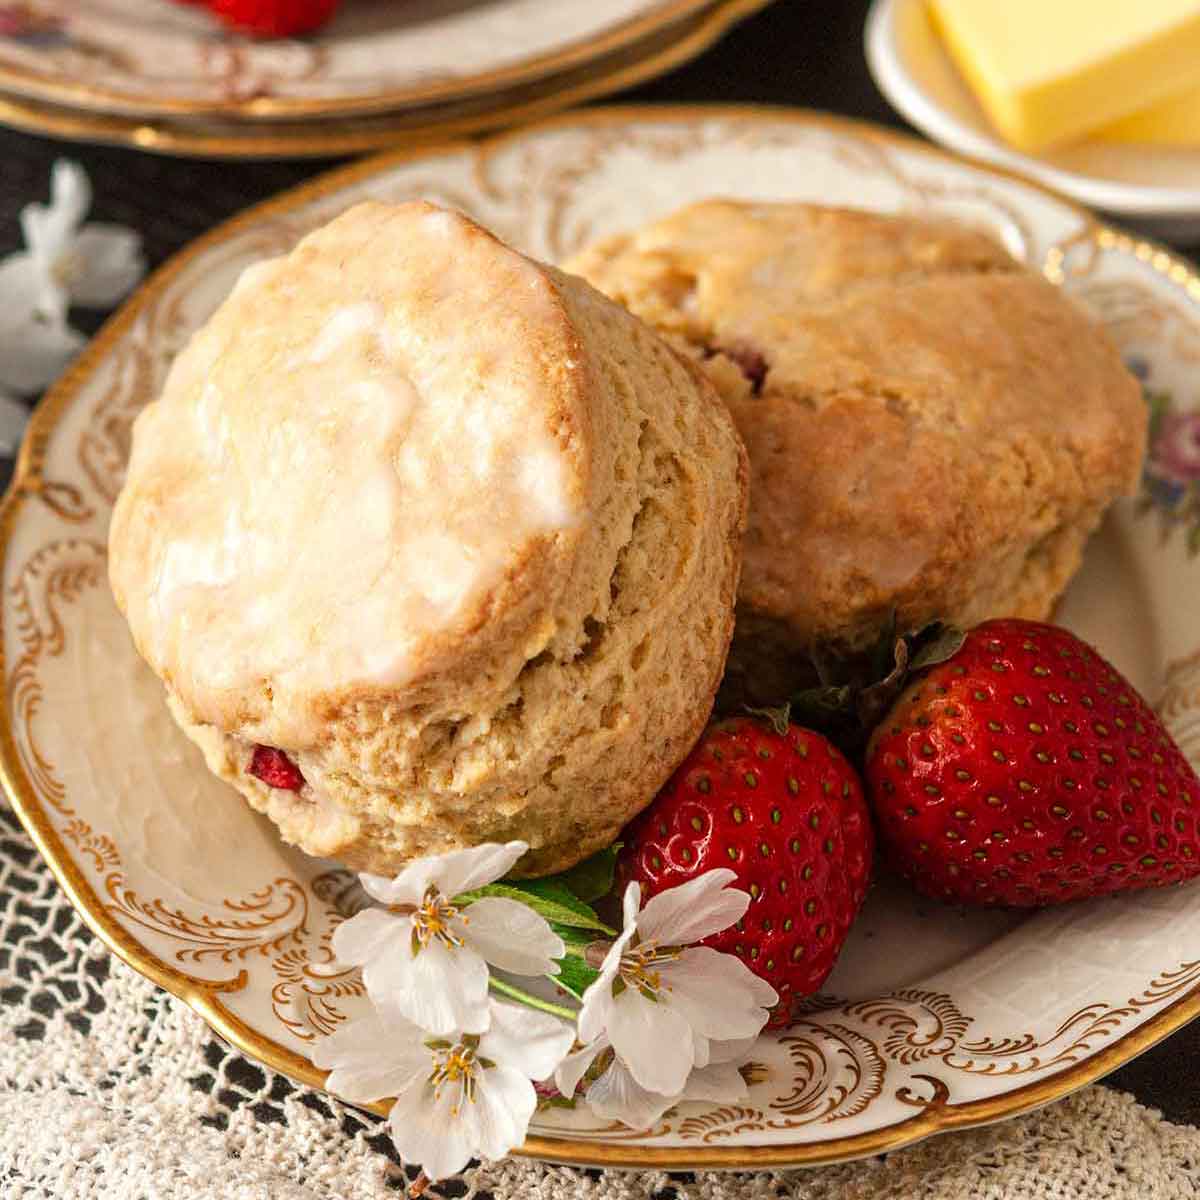 2 scones on a decorative plate with flowers and strawberries, in front of stacked plates and more strawberries.